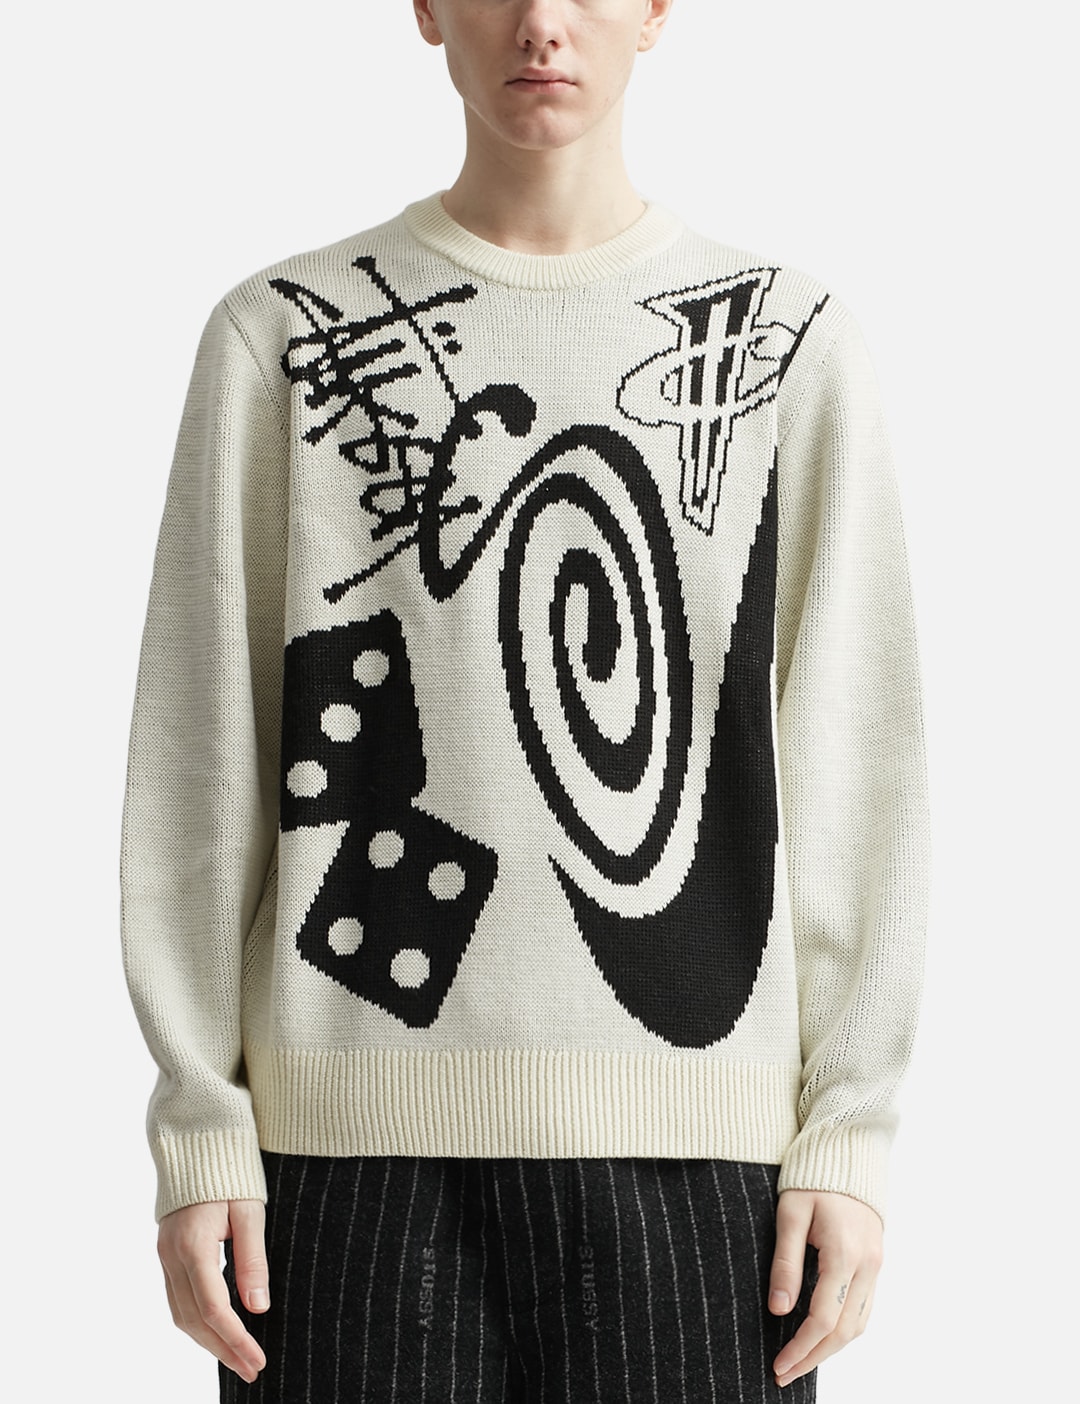 Nike - Nike x Stüssy Knit Sweater | HBX - Globally Curated Fashion and ...